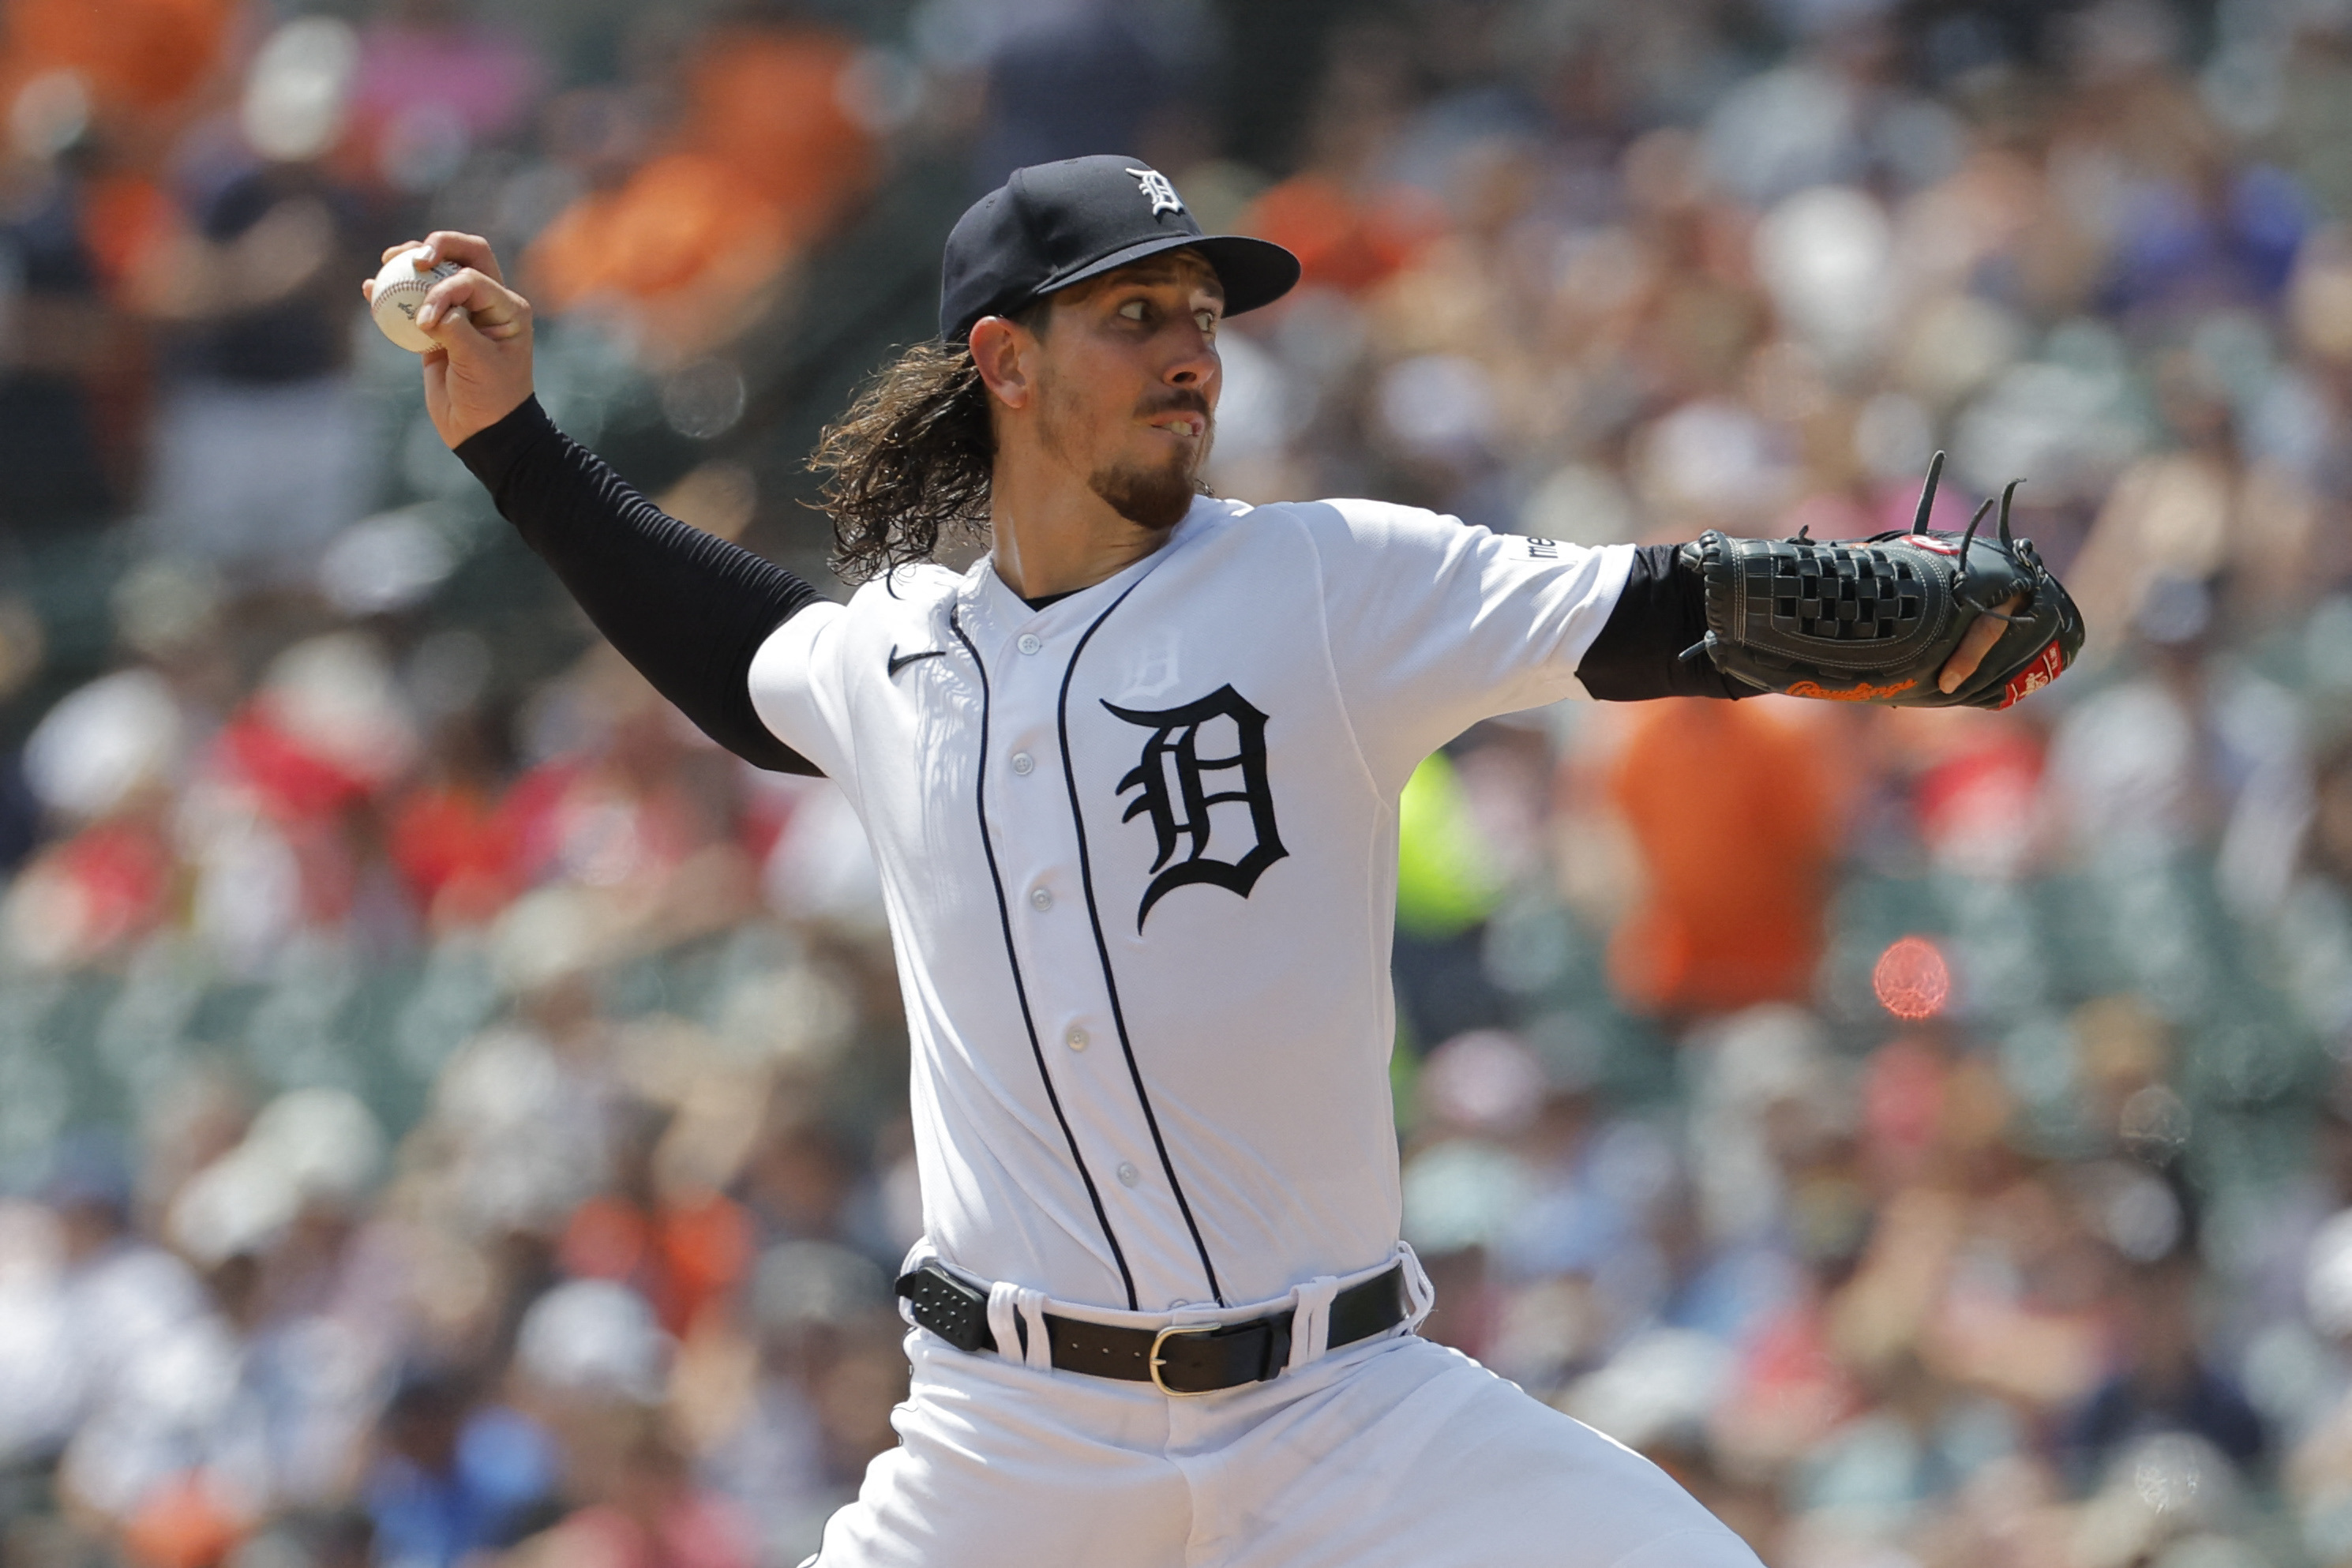 Tigers swept in doubleheader by Ohtani's arm and bat – Friday